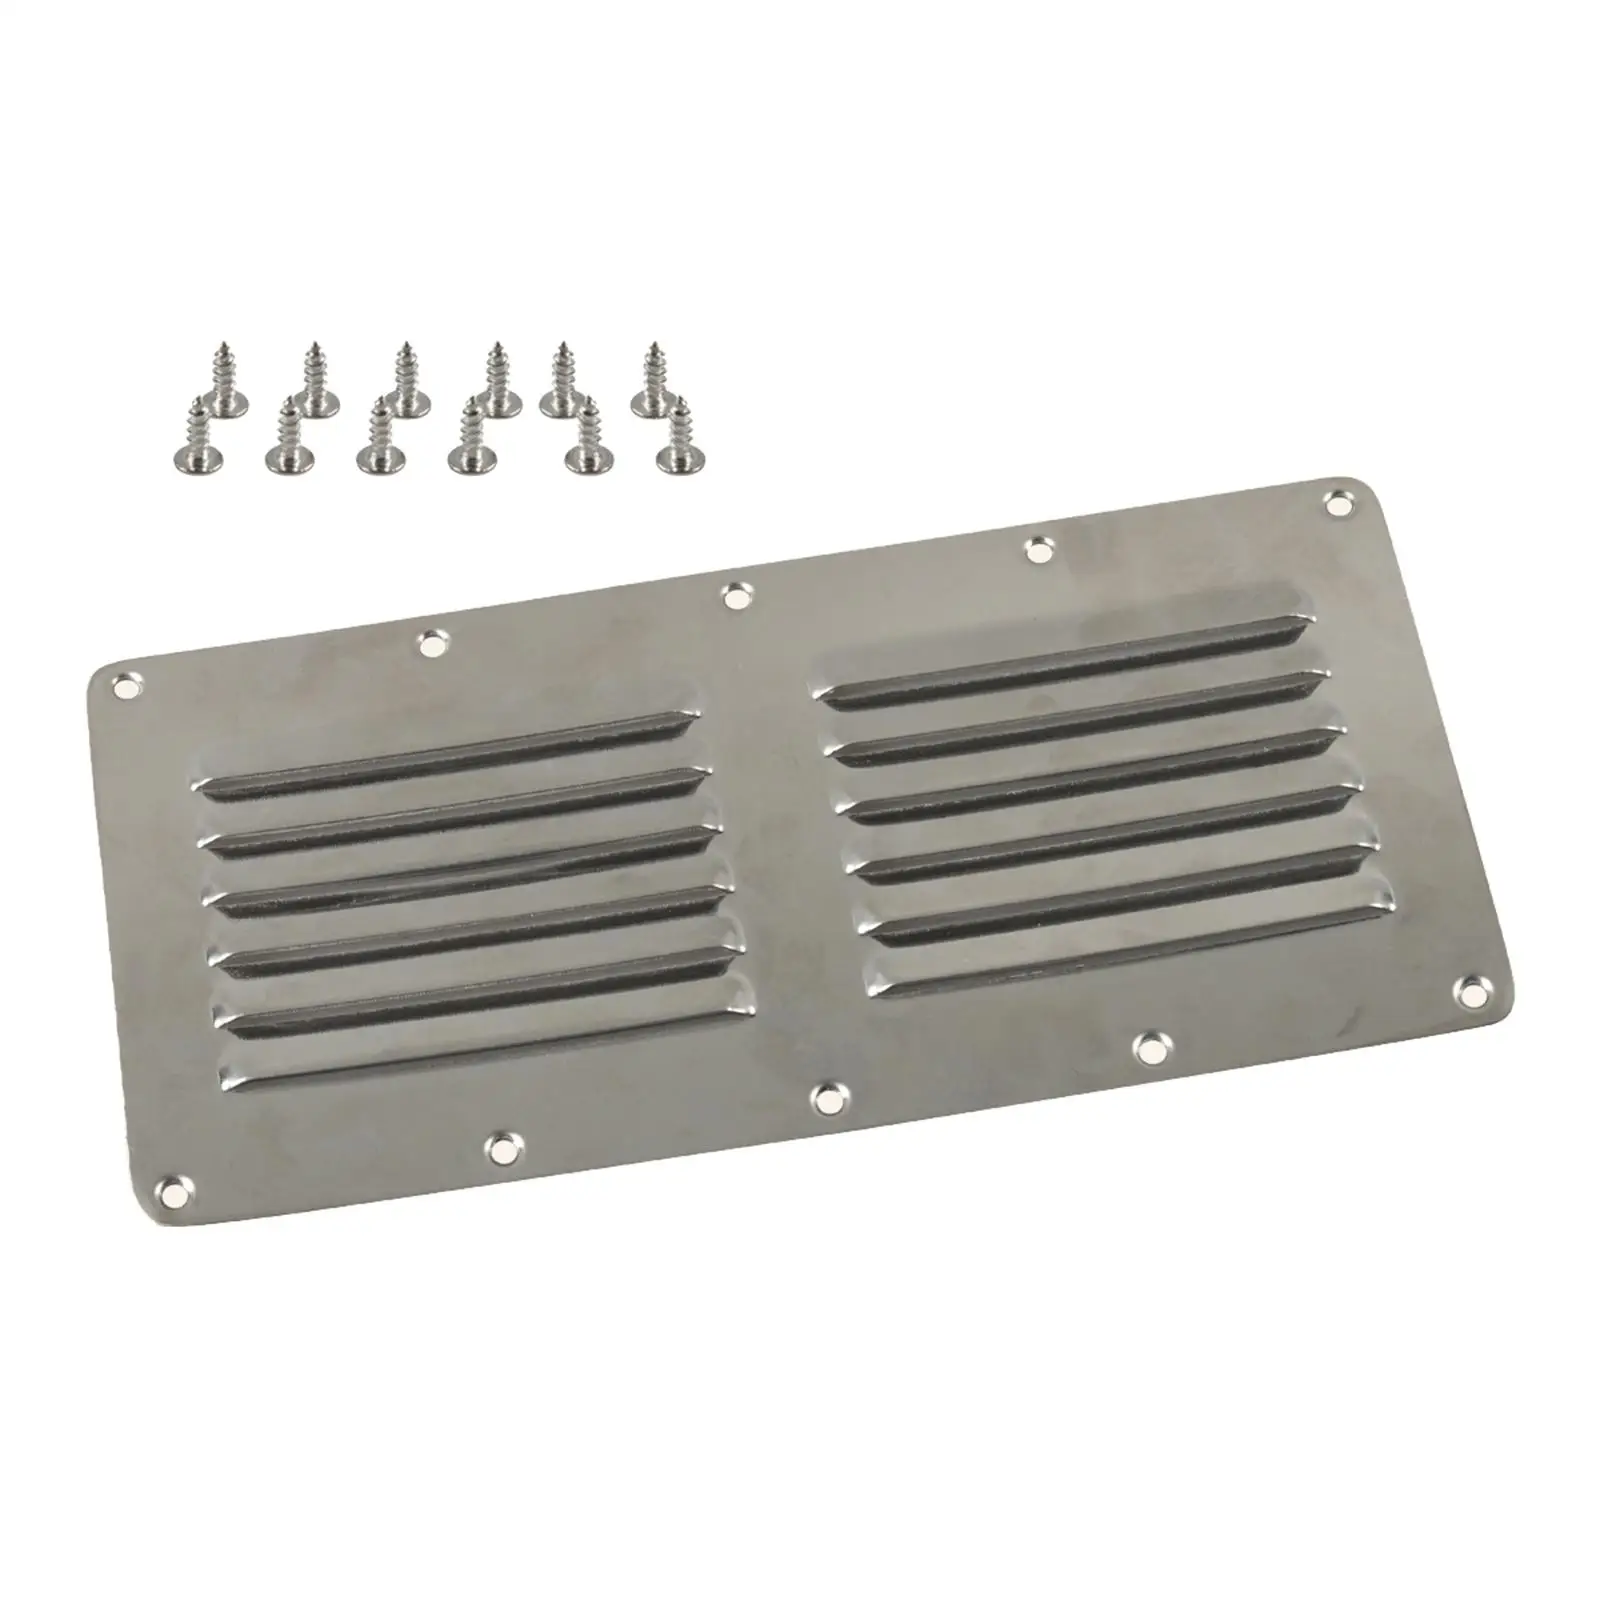 Boat Louver Vent Polished Stable Performance Direct Replaces Erosion Resistant Parts Stainless Steel Accessory for Boat RV